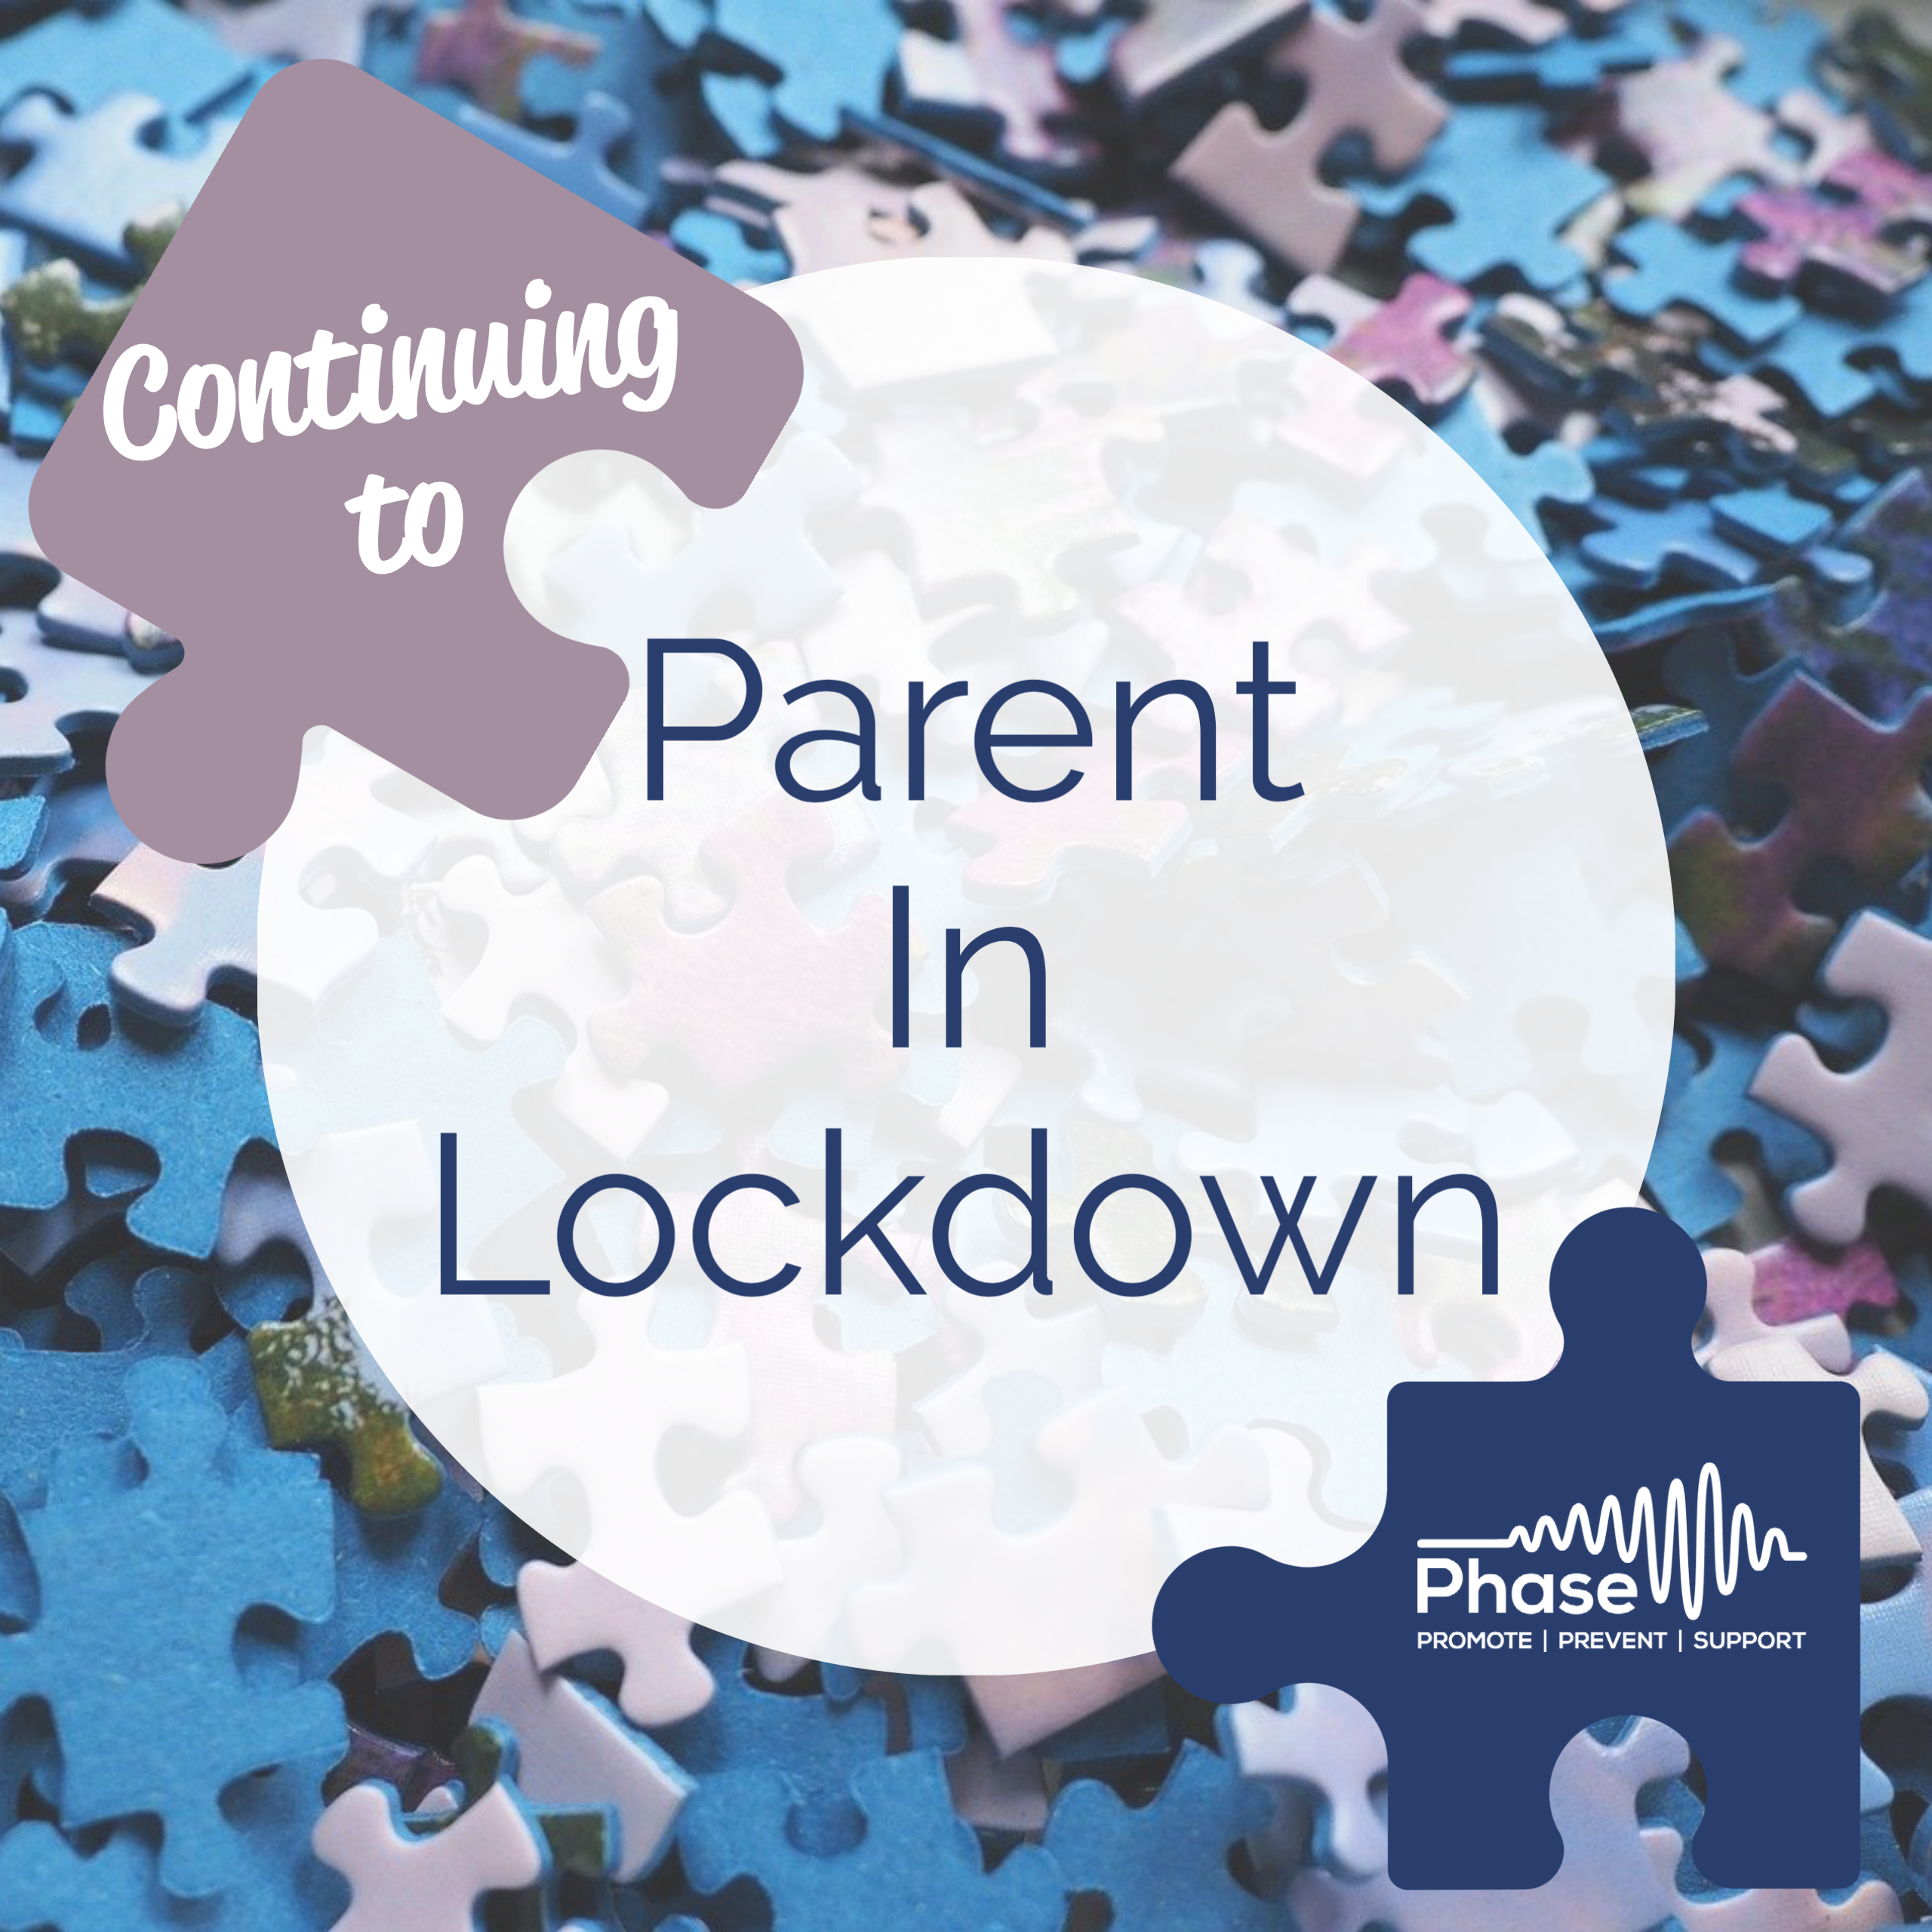 Continuing to Parent in Lockdown